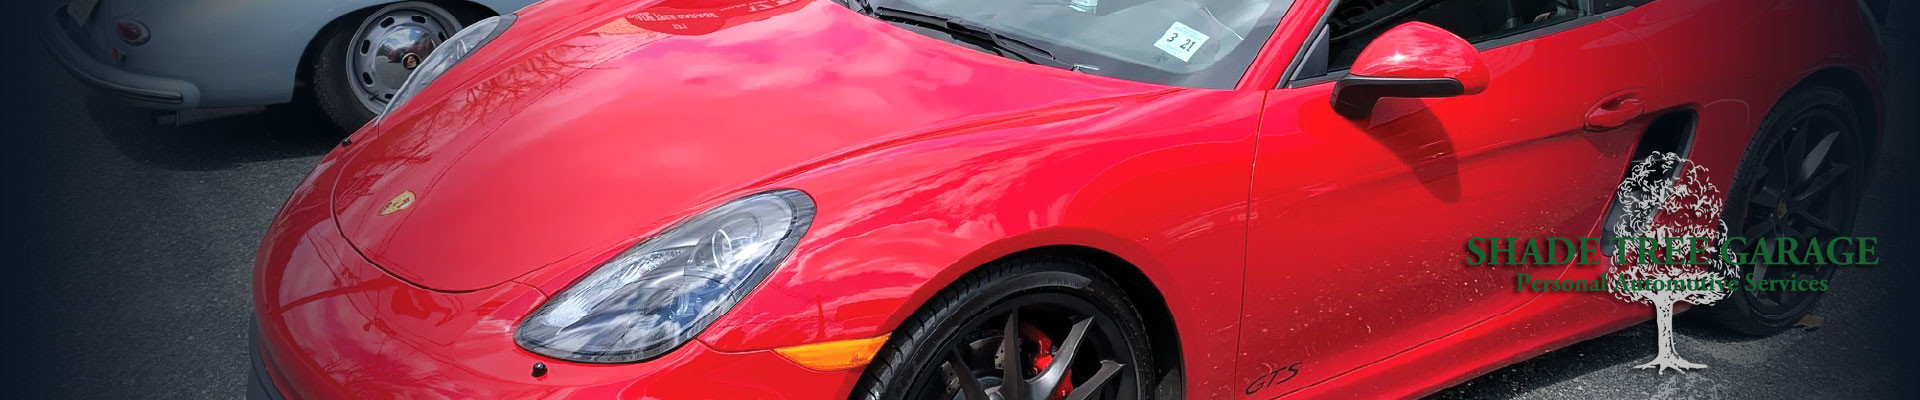 Porsche Repair in Morristown, NJ by Shade Tree Garage a leading Porsche repair shop in New Jersey specializing in Porsche repair, maintenance, performance tuning and service